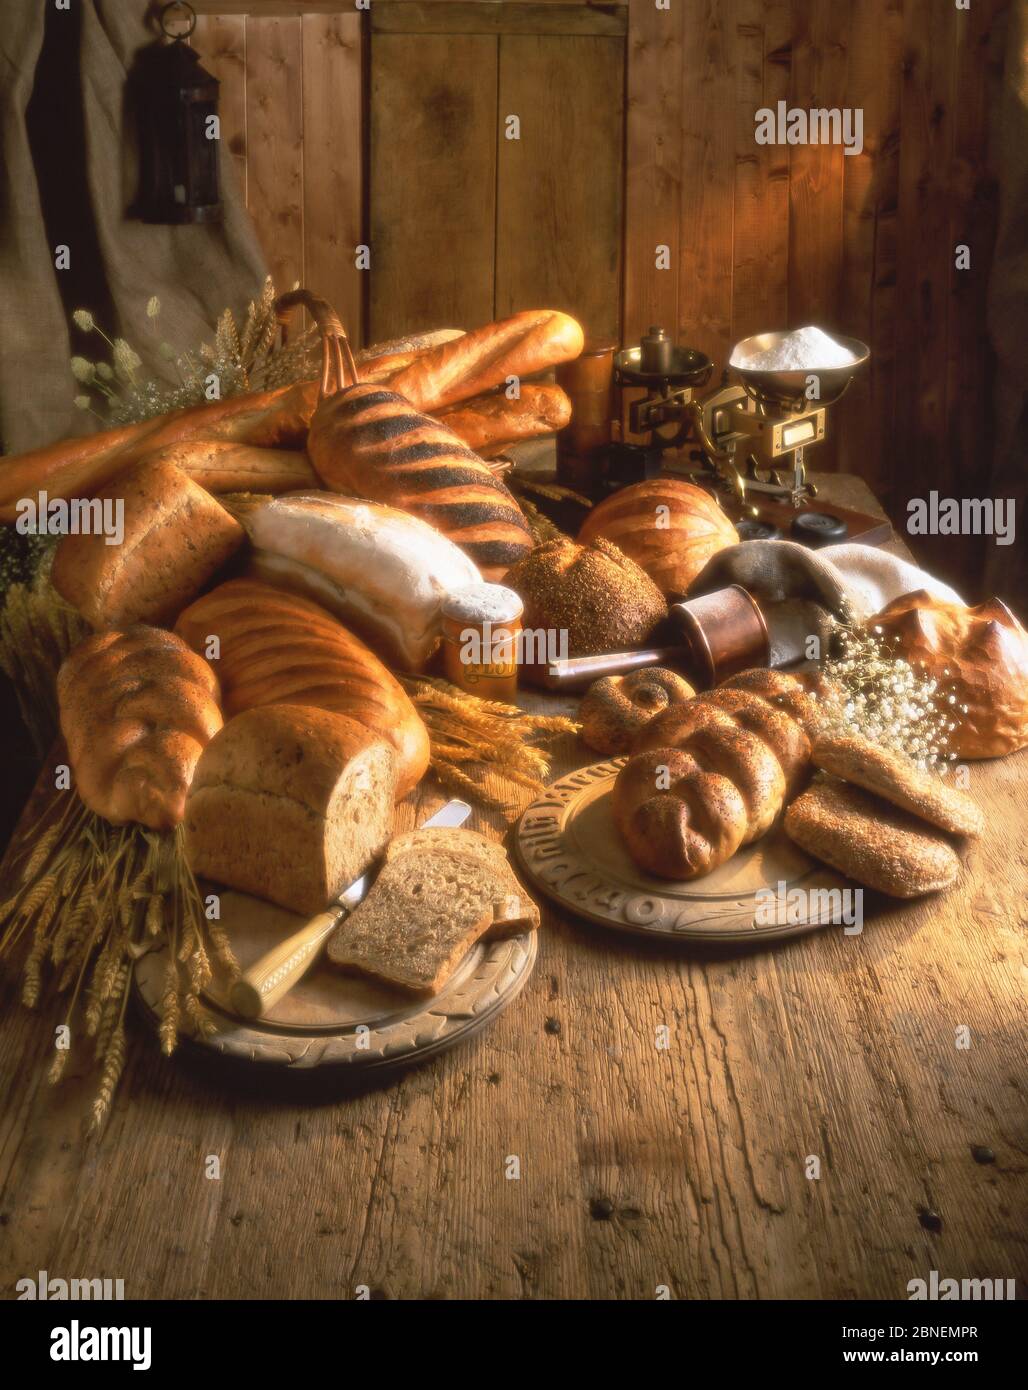 Selection of breads, breadboard and flour, Winkfield, Berkshire, England, United Kingdom Stock Photo